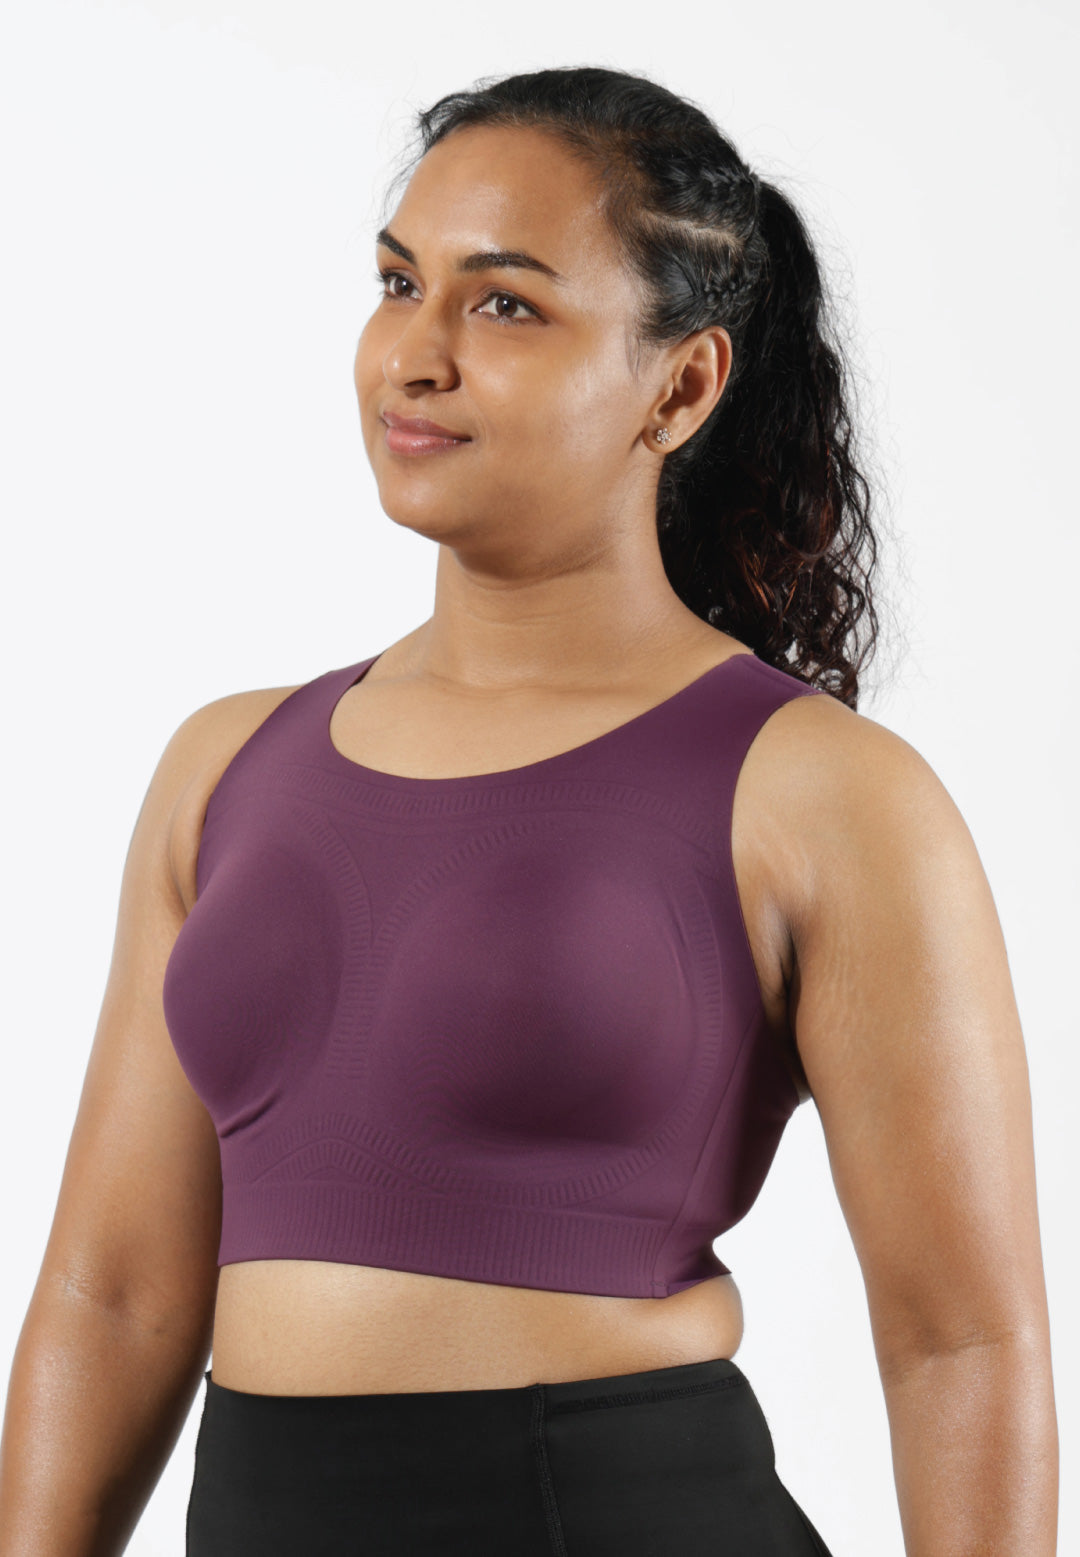 Sports bras you'll love - Made by Blissclub - The Ultimate Comfort